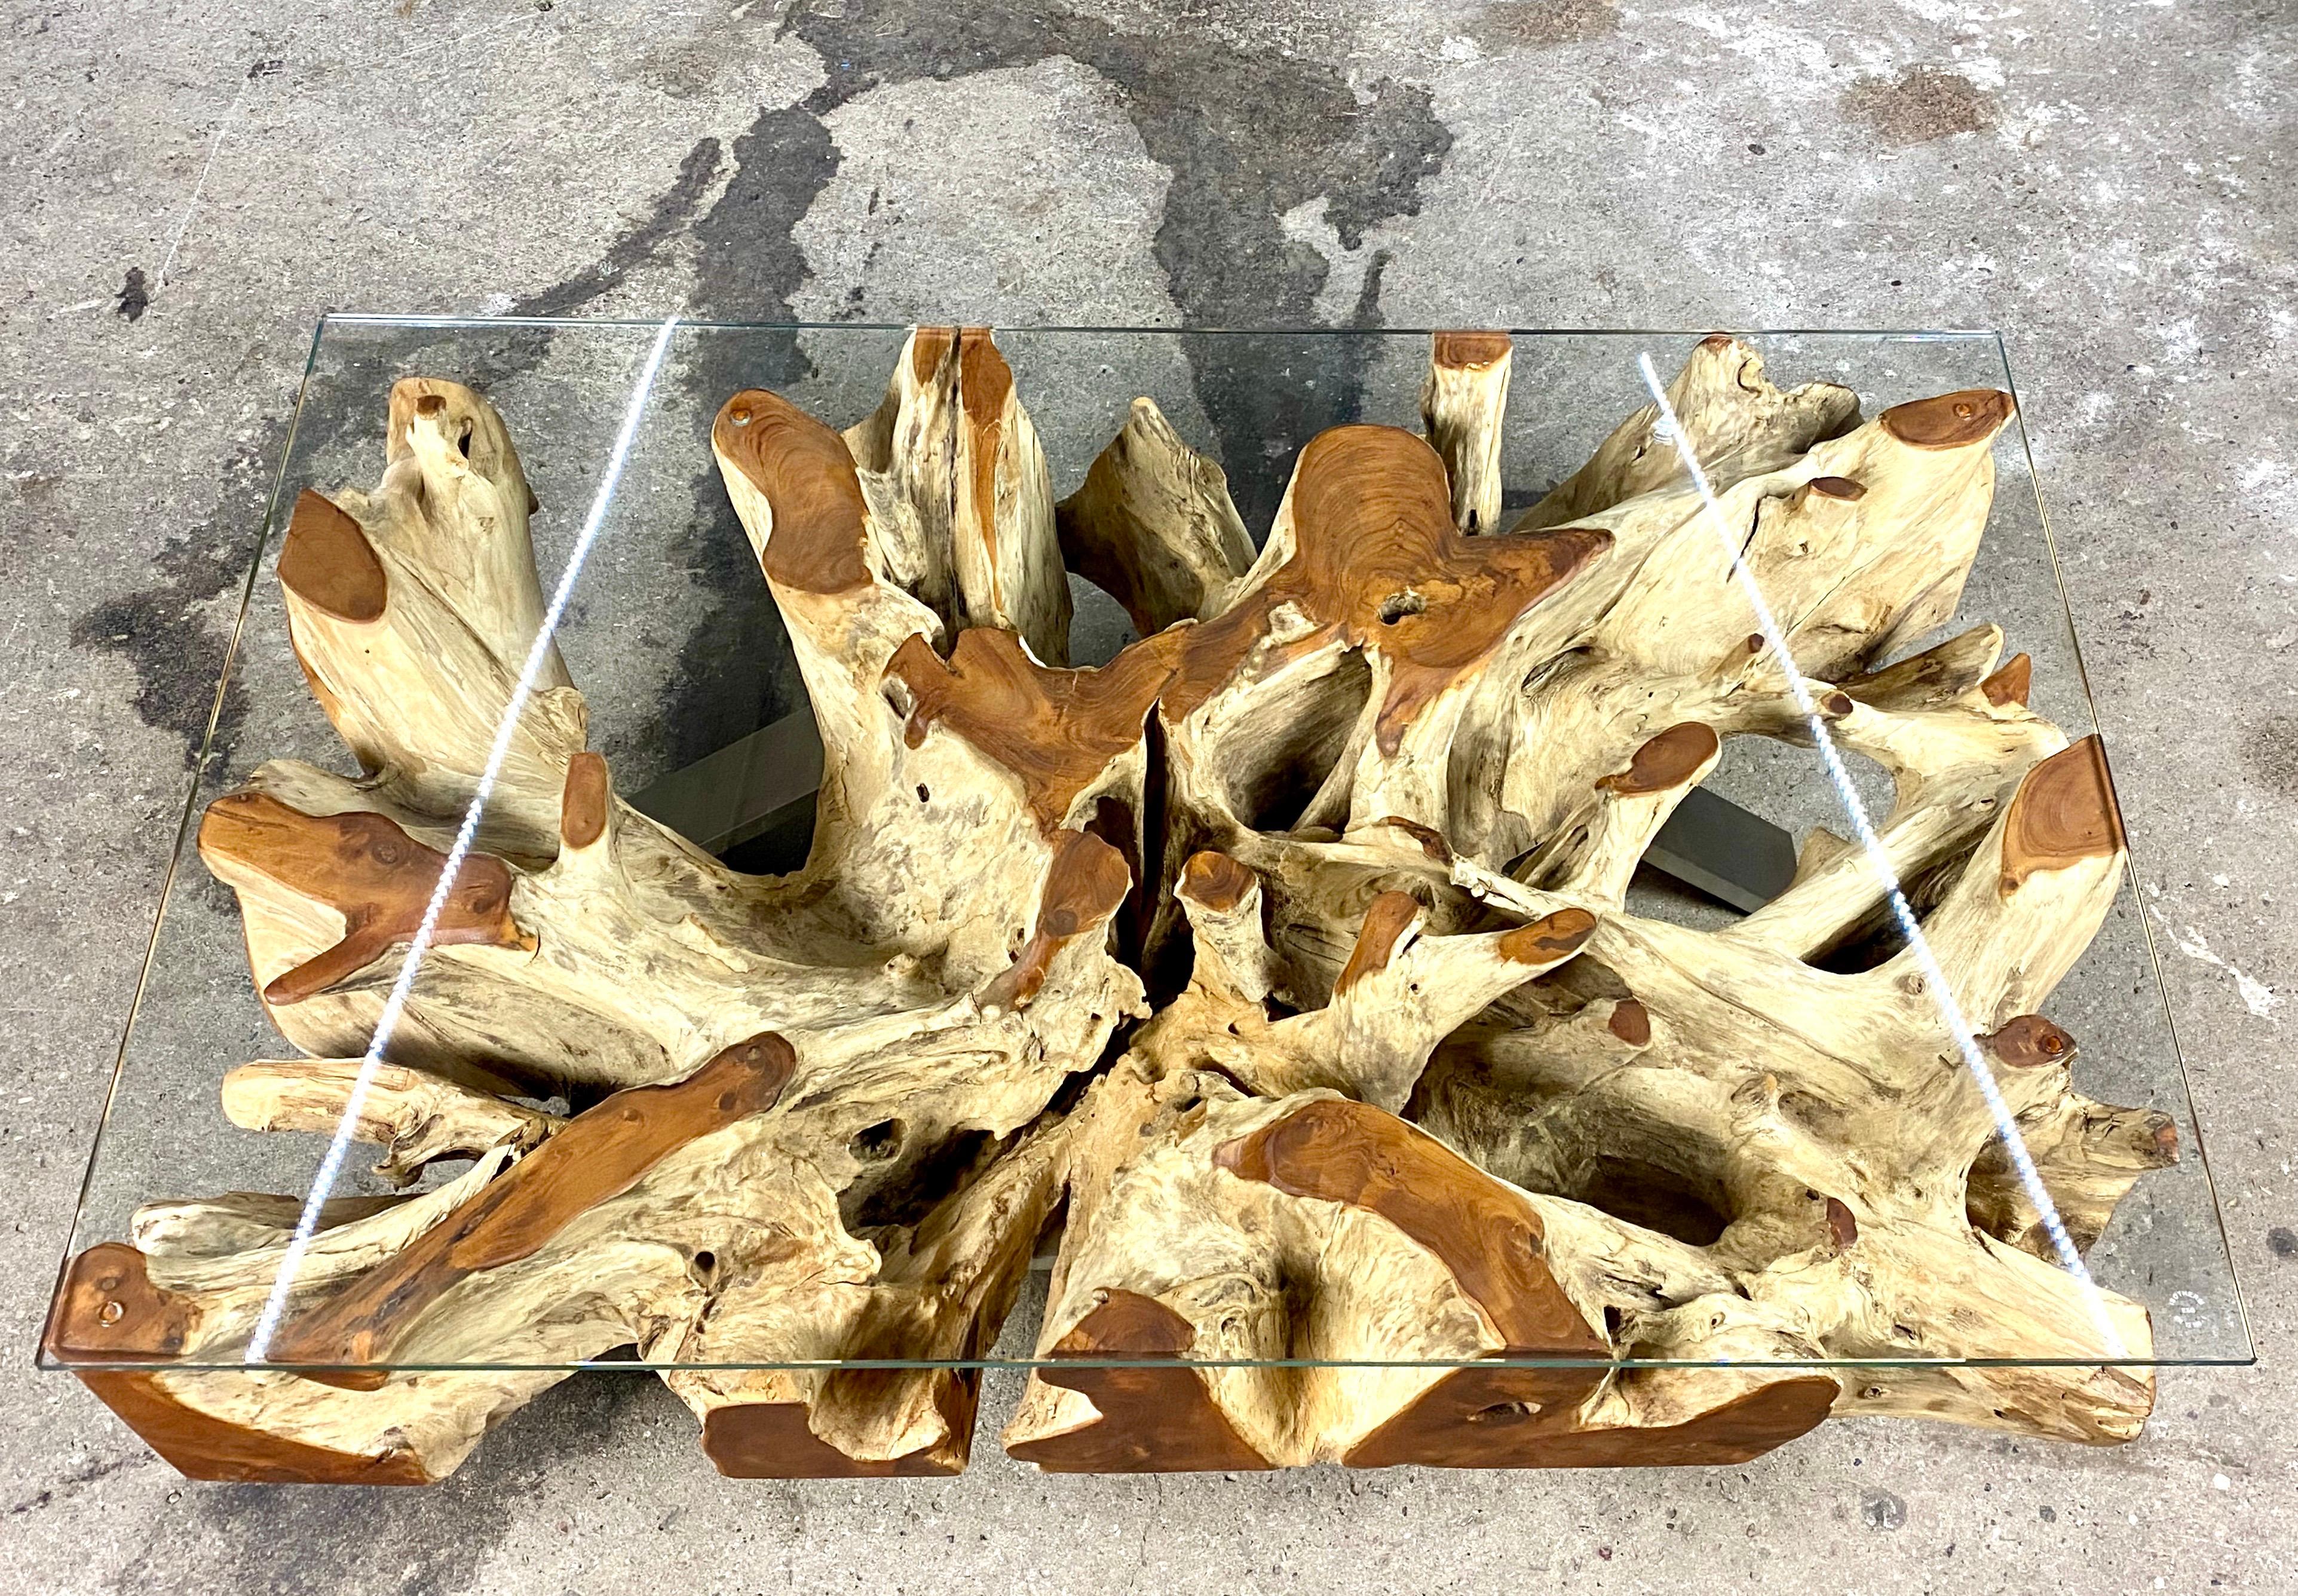 Extravagant organic modern teak root coffee/ sofa table with safety glass plate on stainless steel feet. Impressing with an amazing design, this striking organic design table was artfully processed from a massive teak wood root while the cut